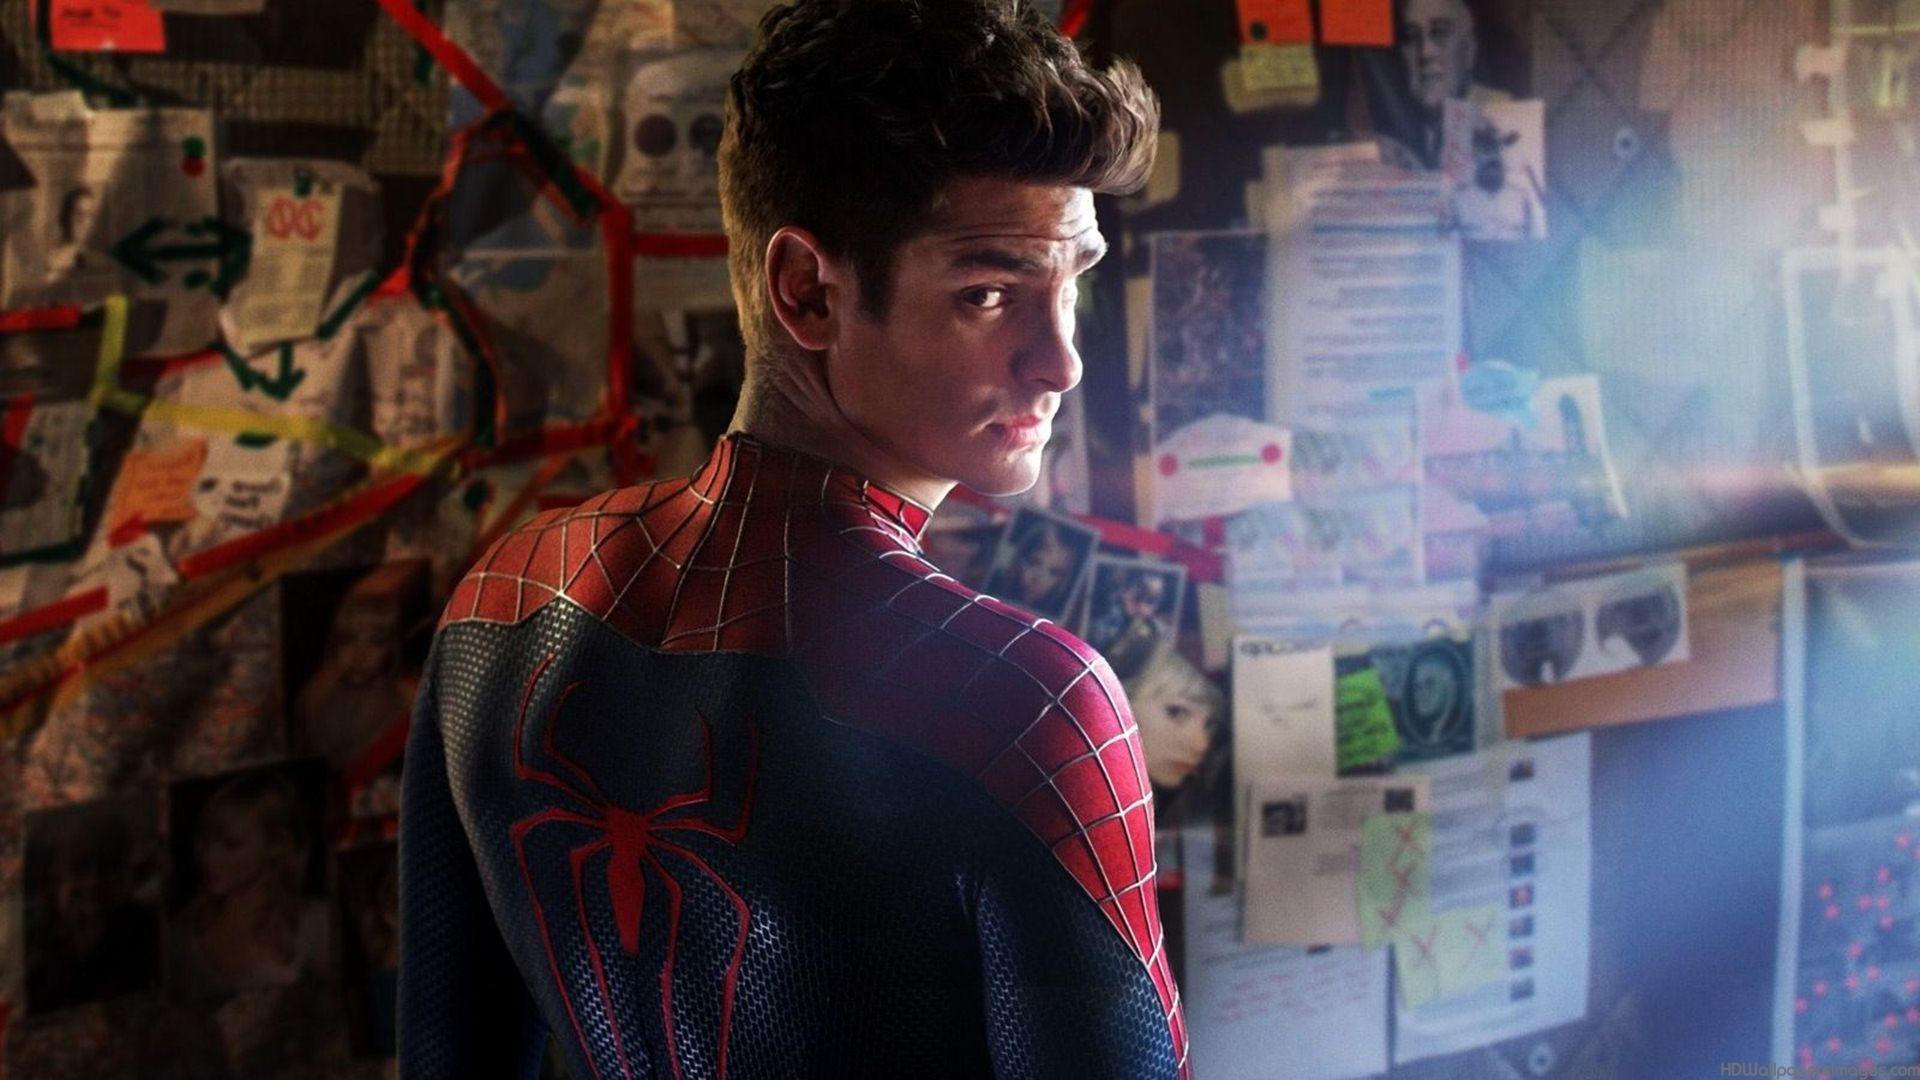 Andrew Garfield as Spider-Man, with his back to the camera and his mask off